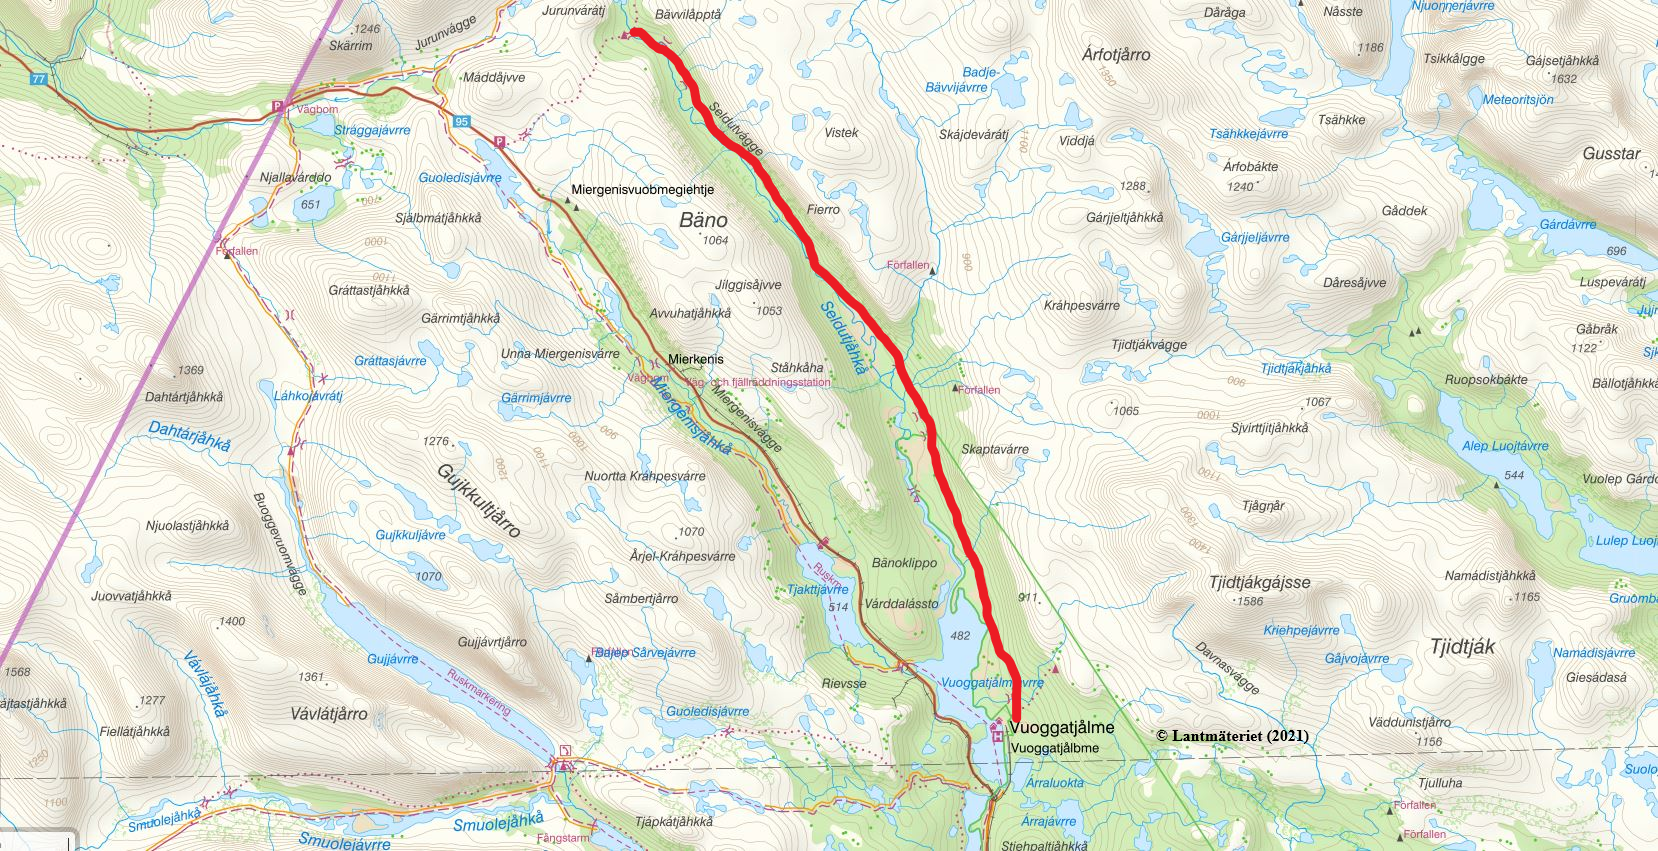 The trail between Jurun and Vuoggatjålme is marked with a red line.